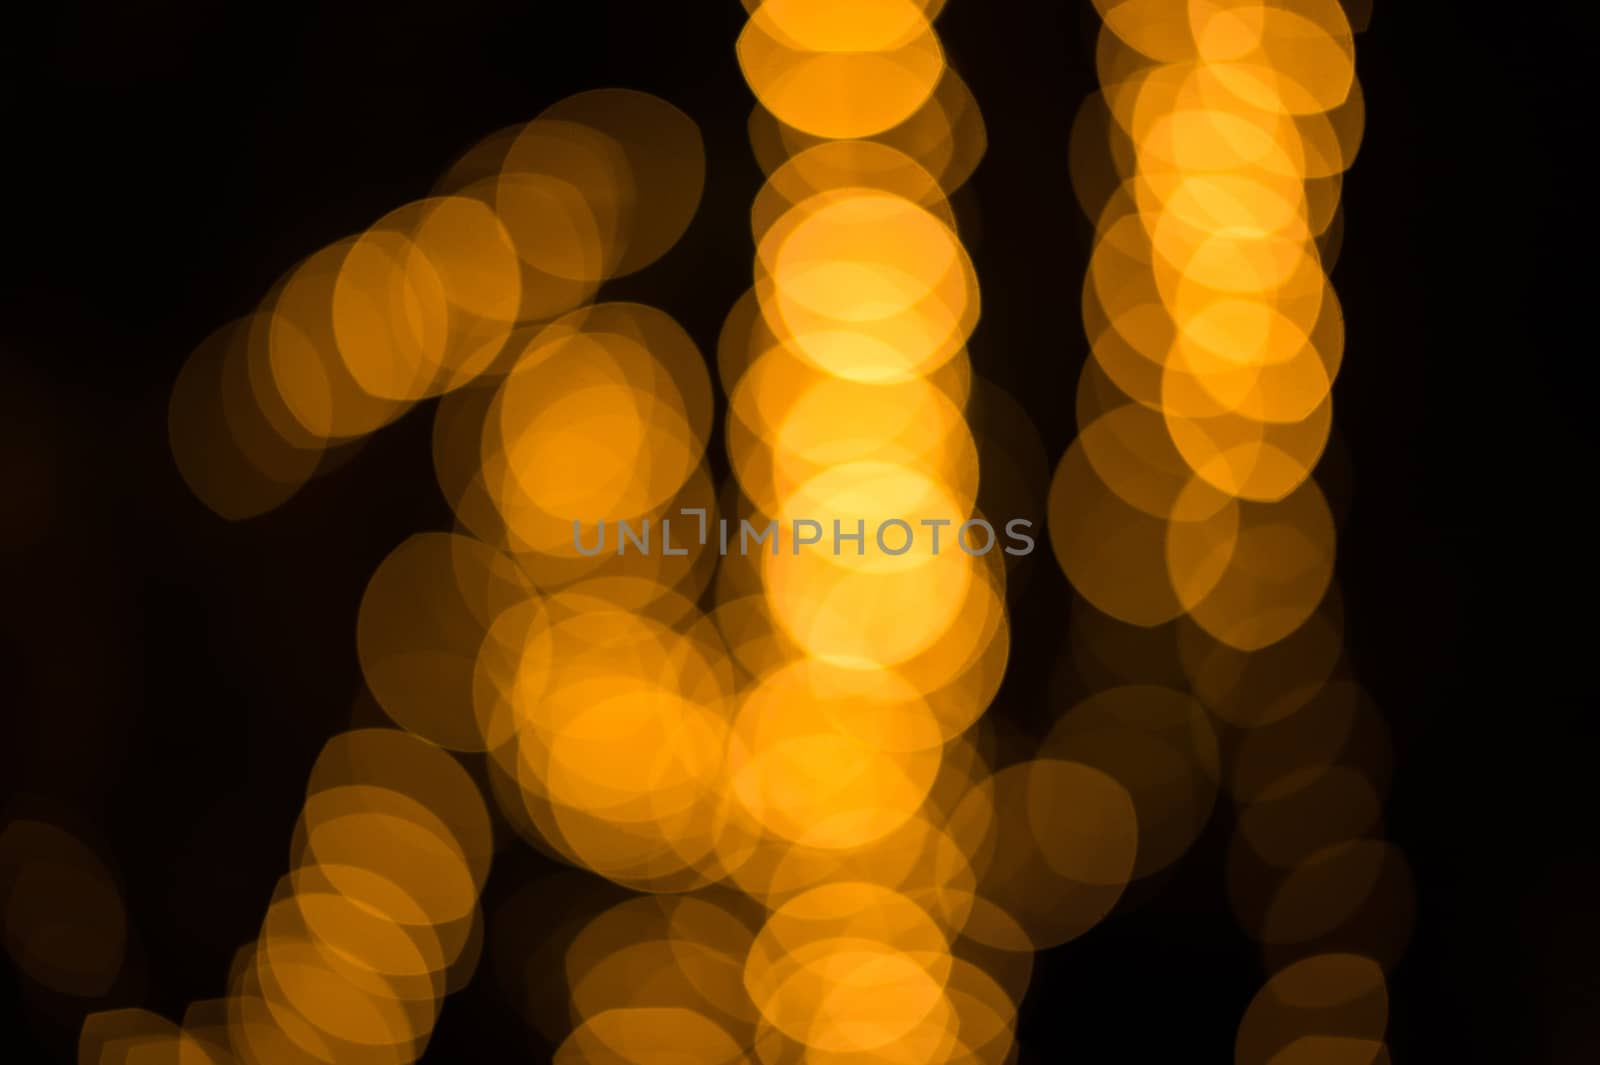 Blurred of light background